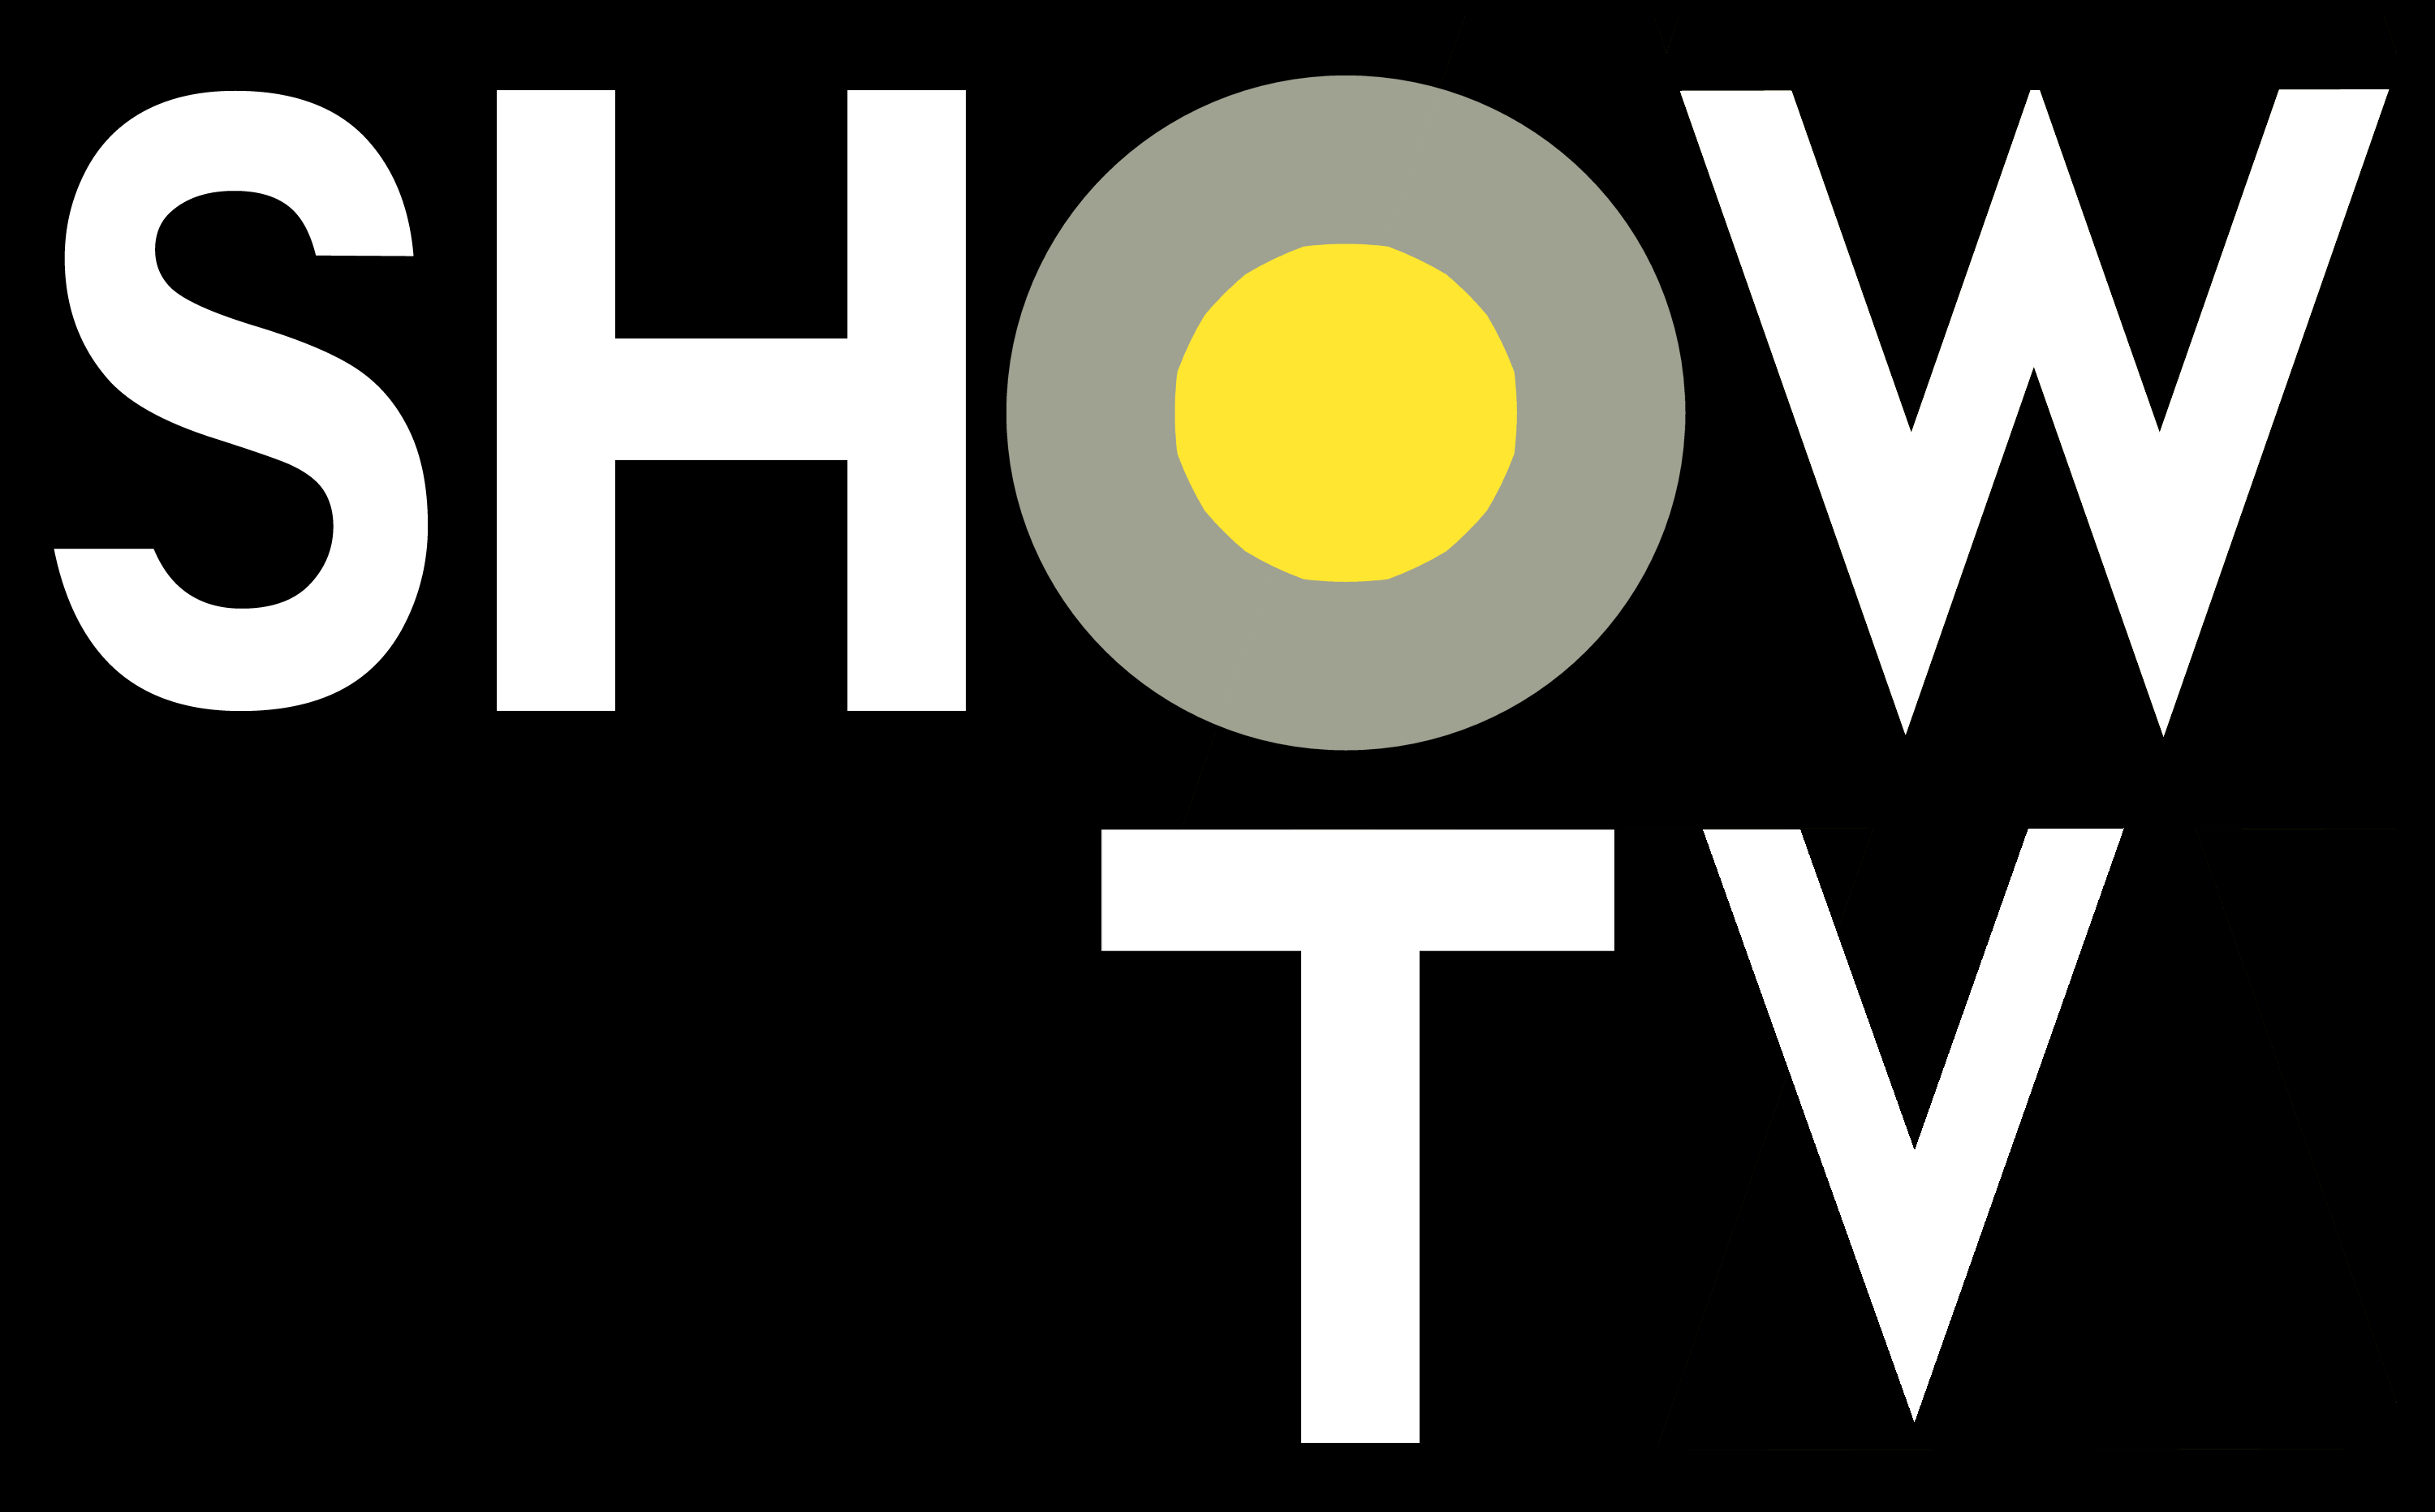 TV Show Logo - File:Former logo of Show TV.png - Wikimedia Commons